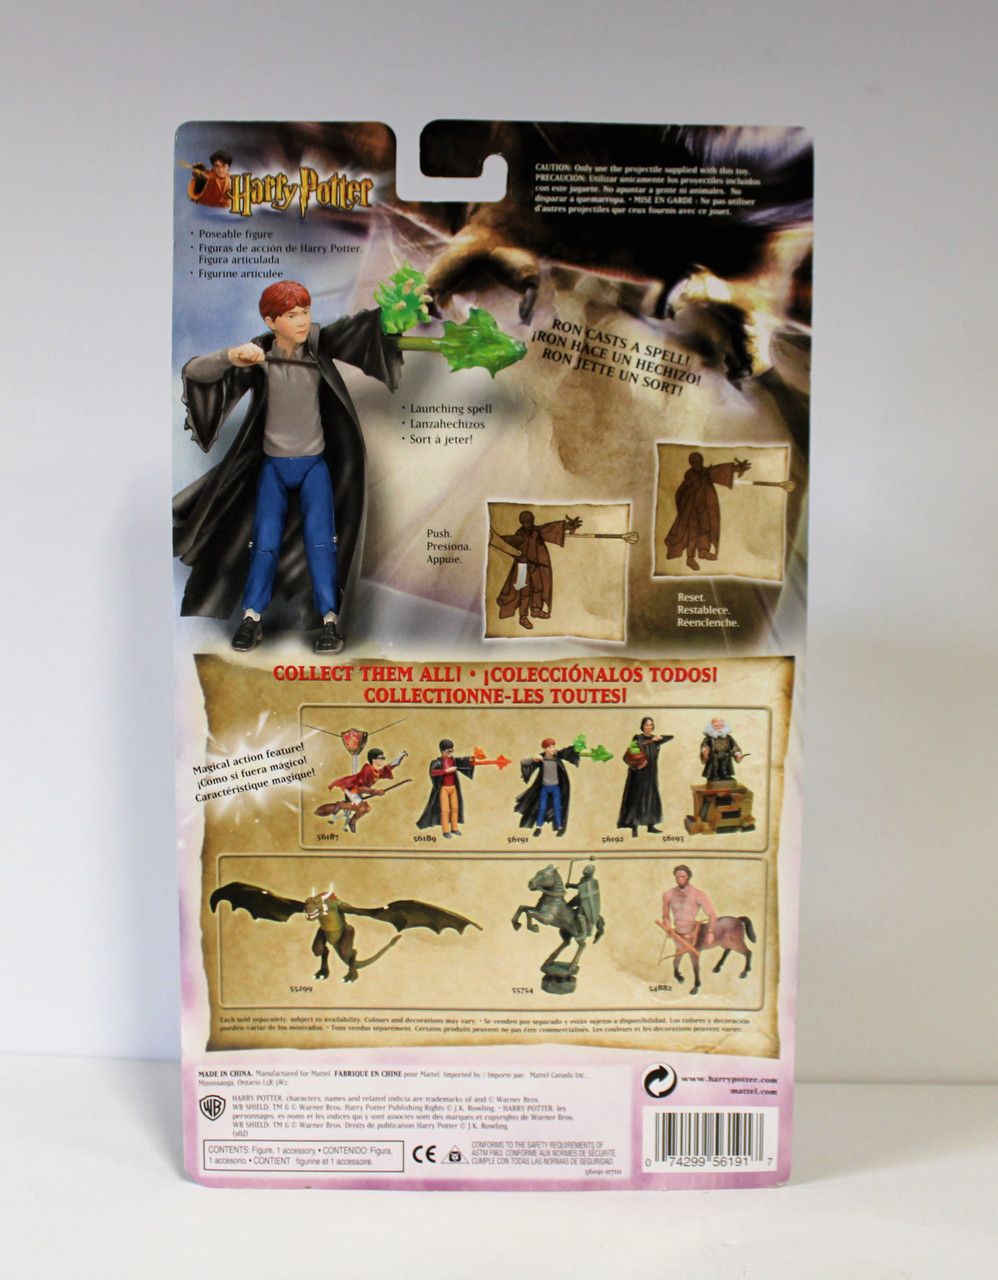 HARRY POTTER 1 SORCERER'S STONE INTERACTIVE HB ROWLING@ - THE TOY